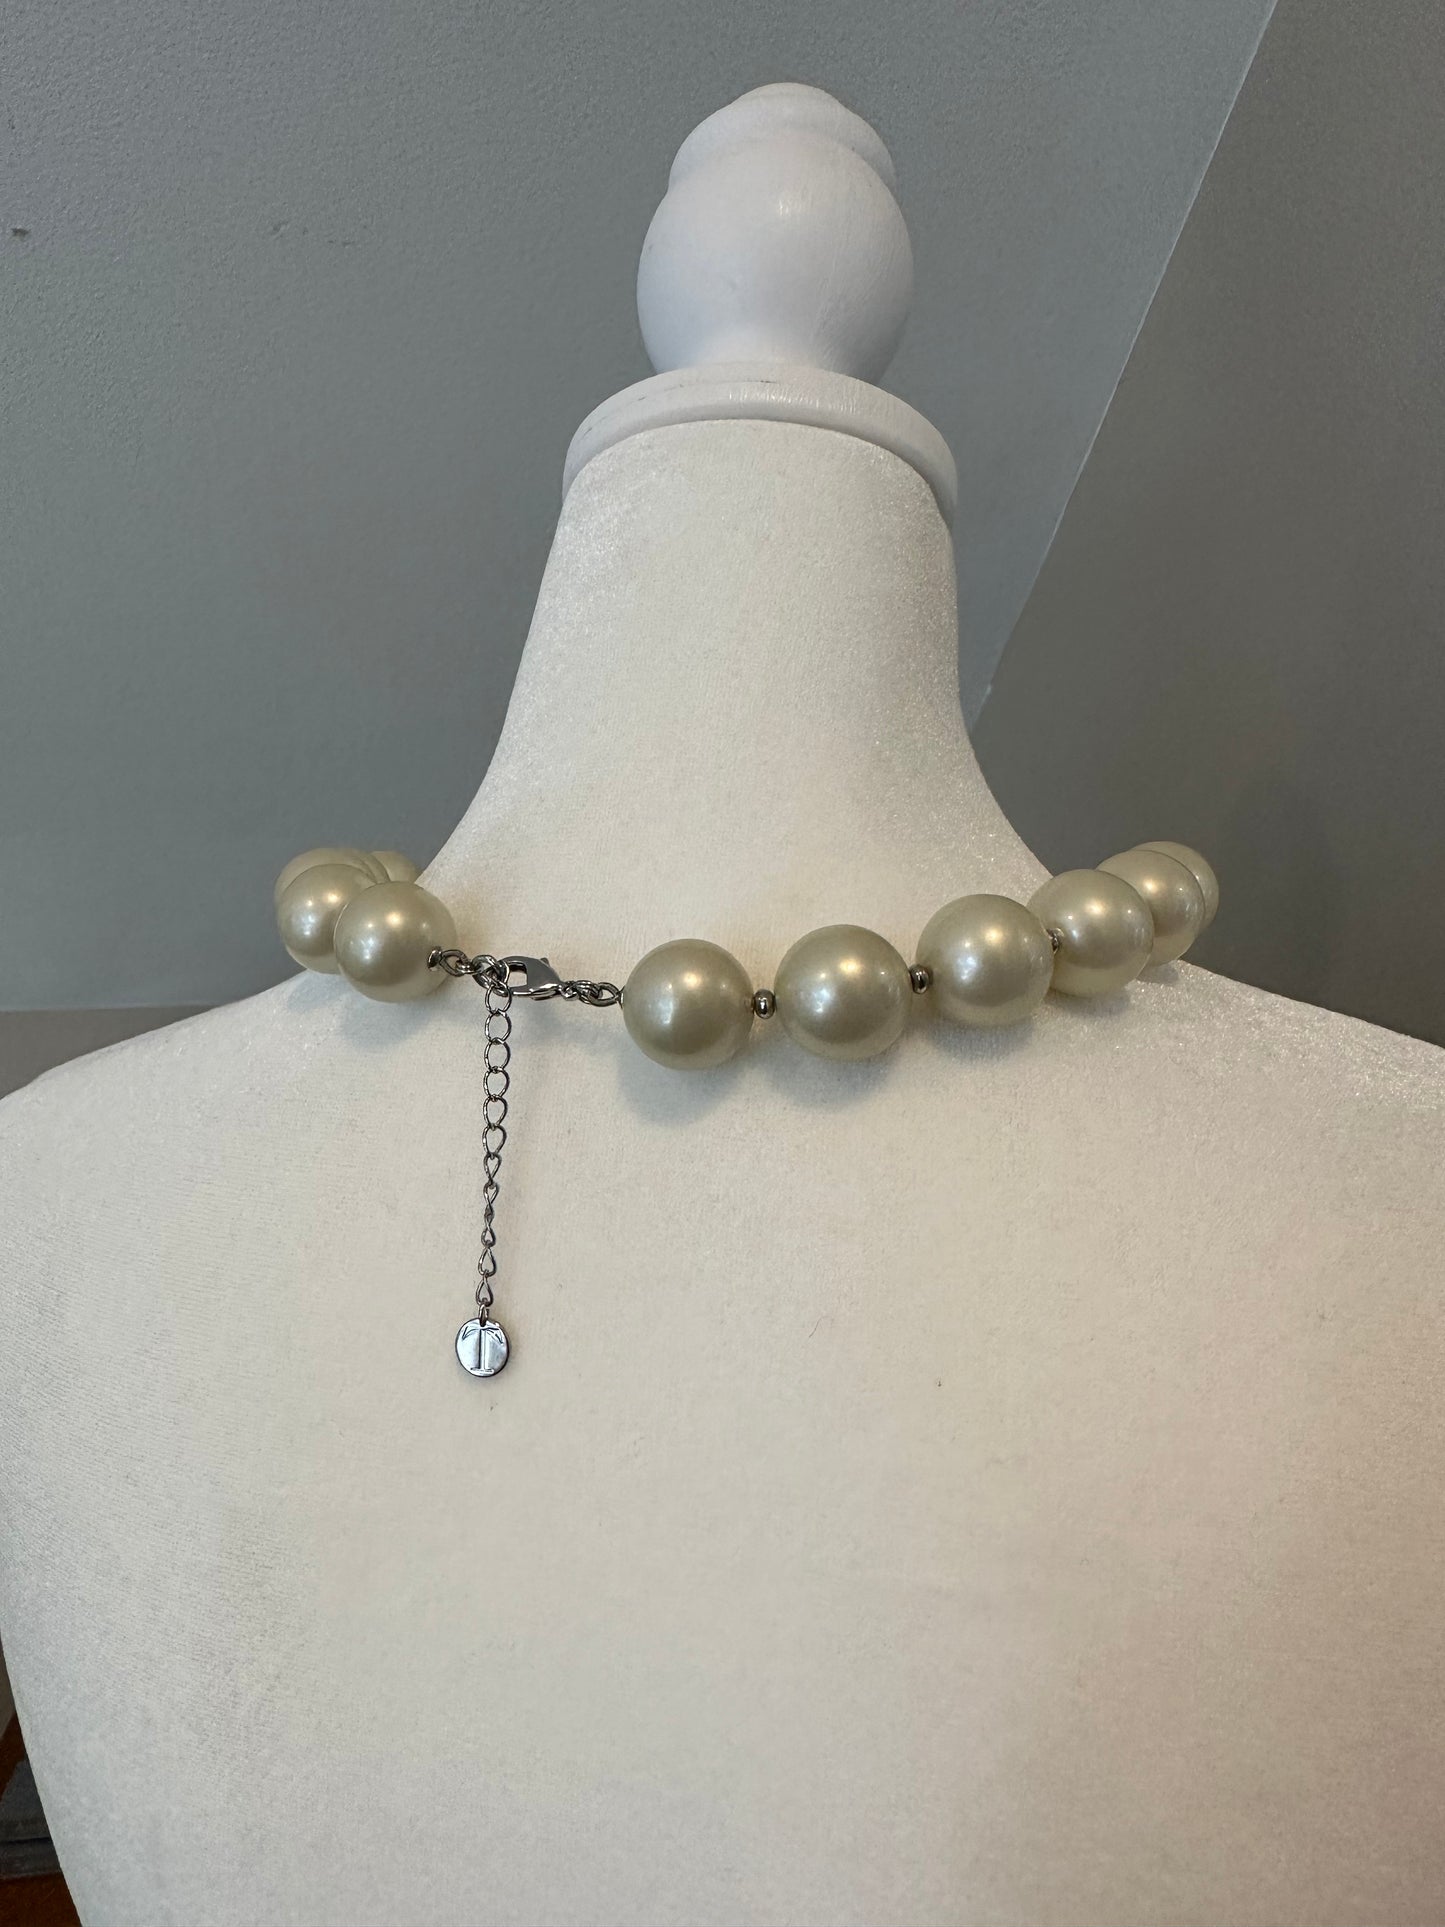 Large Pearl Necklace